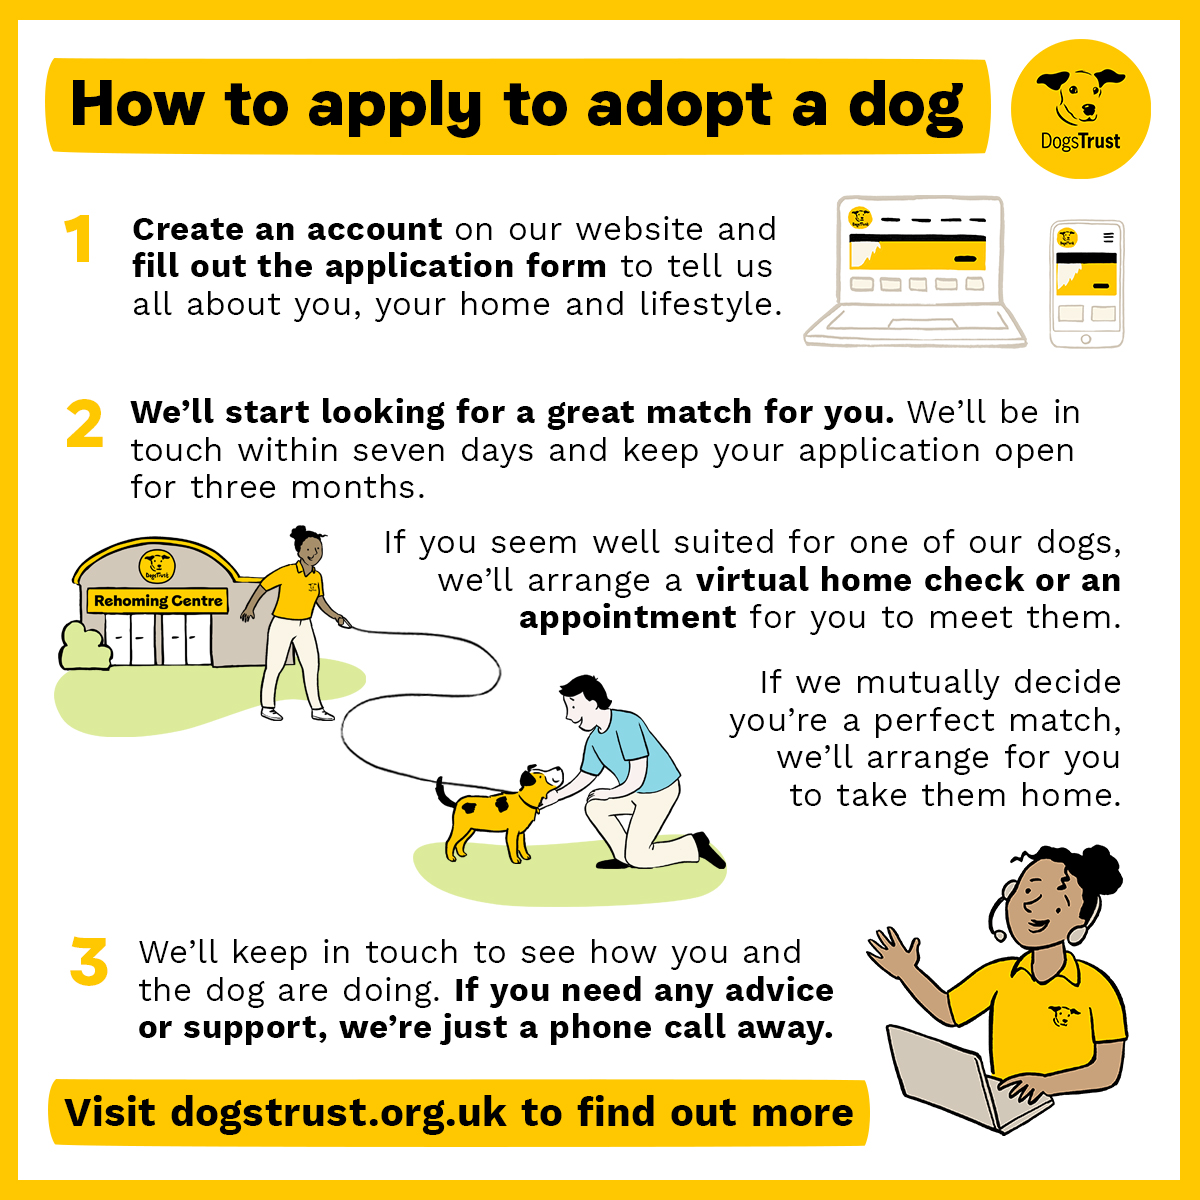 📣 From 17th November, the way we rehome dogs is changing which will mean an equal chance for all dogs to find a family and more dog lovers able to welcome to a Dogs Trust dog into their home 🐶 Find out more 👉 bit.ly/3MvaANr